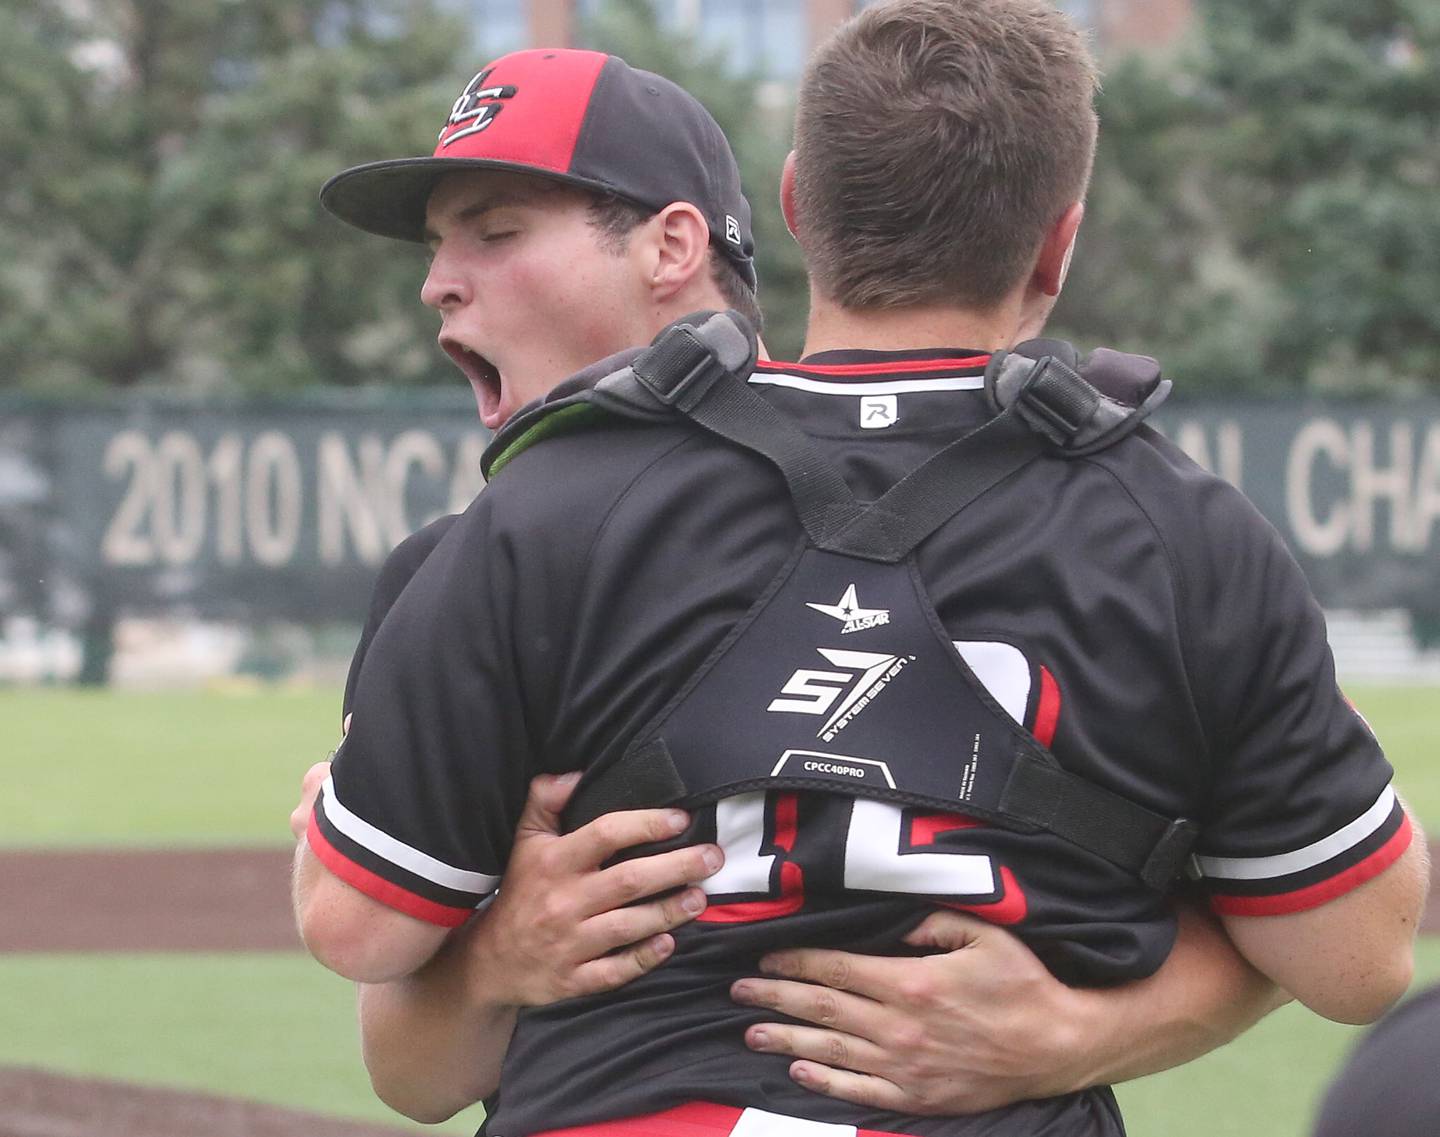 Henry-Senachwine pitcher Lance Kieswetter hugs catcher Colton Williams after defeating Milford during the Class 1A Supersectional game on Monday, May 29, 2023 at Illinois Wesleyan University in Bloomington.